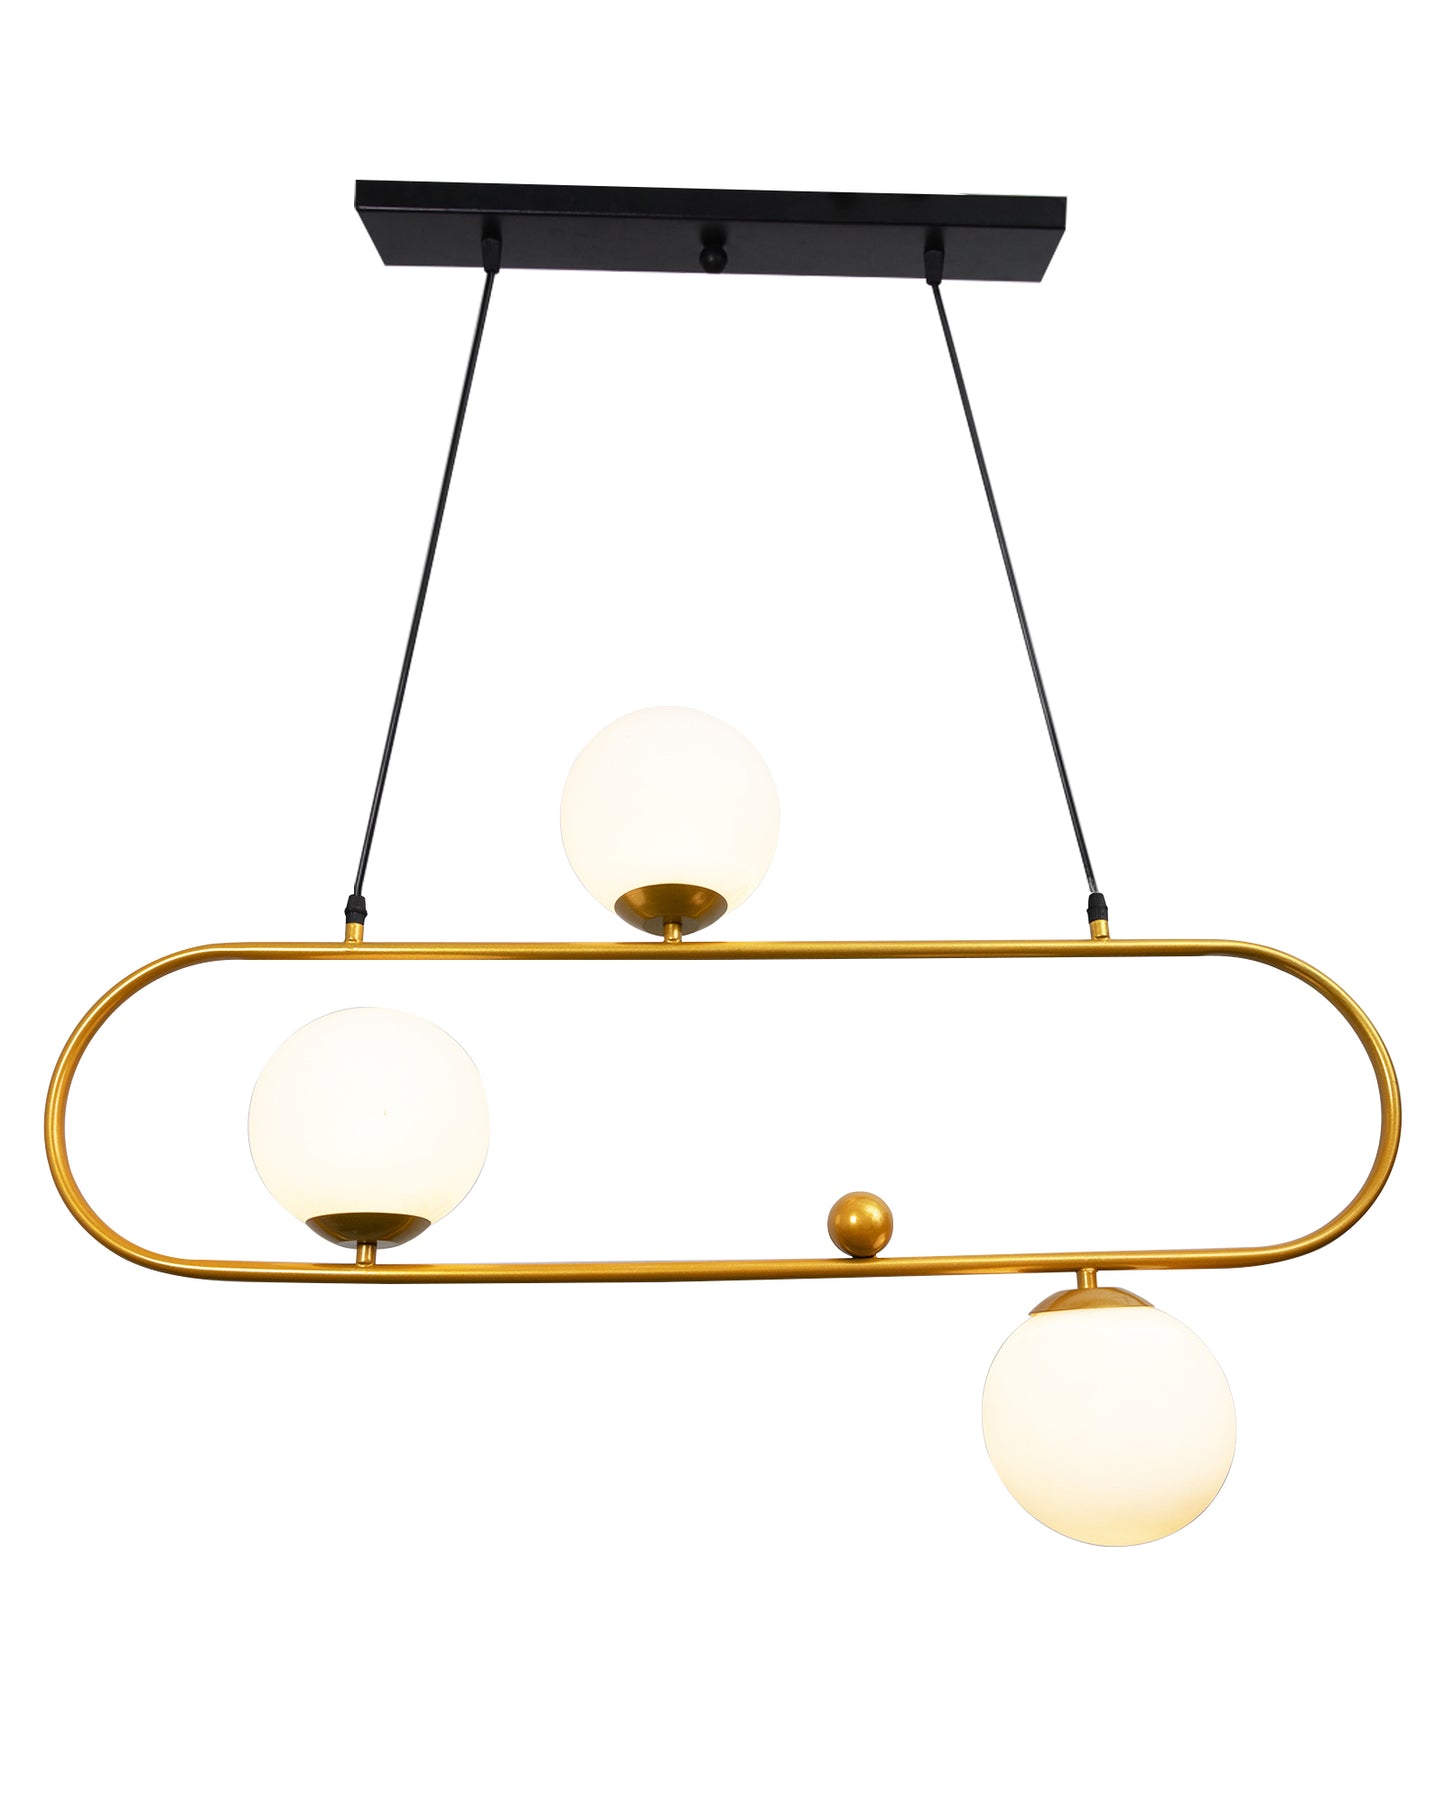 April in Paris Golden Oval Chandelier with Frosted Glass, 3 Light Pendant Light